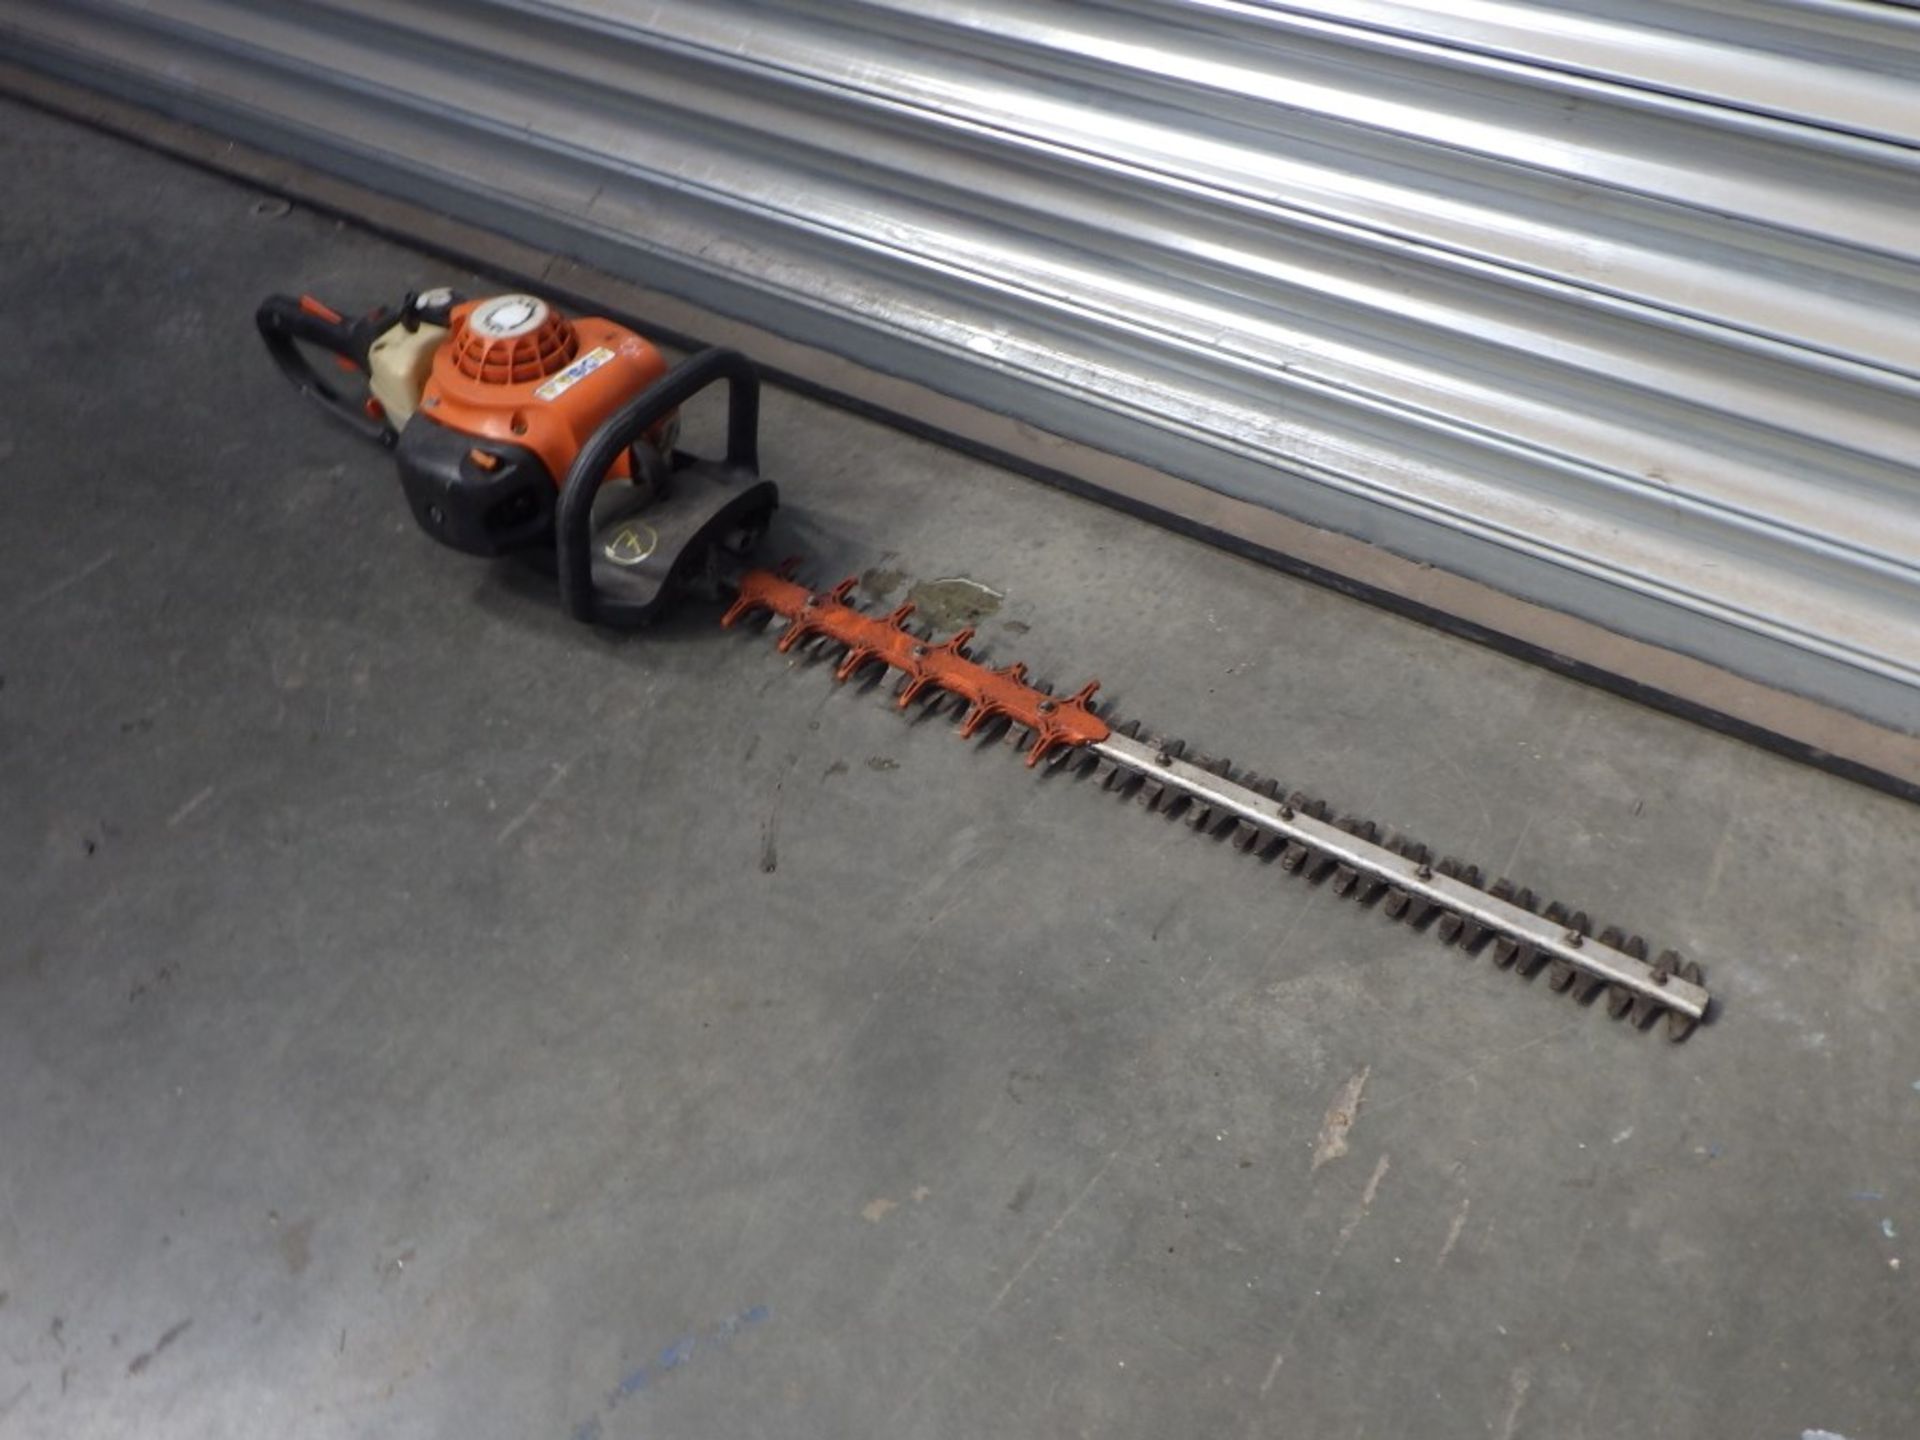 Stihl HS 82RC Petrol Hedge Trimmer - Image 4 of 5